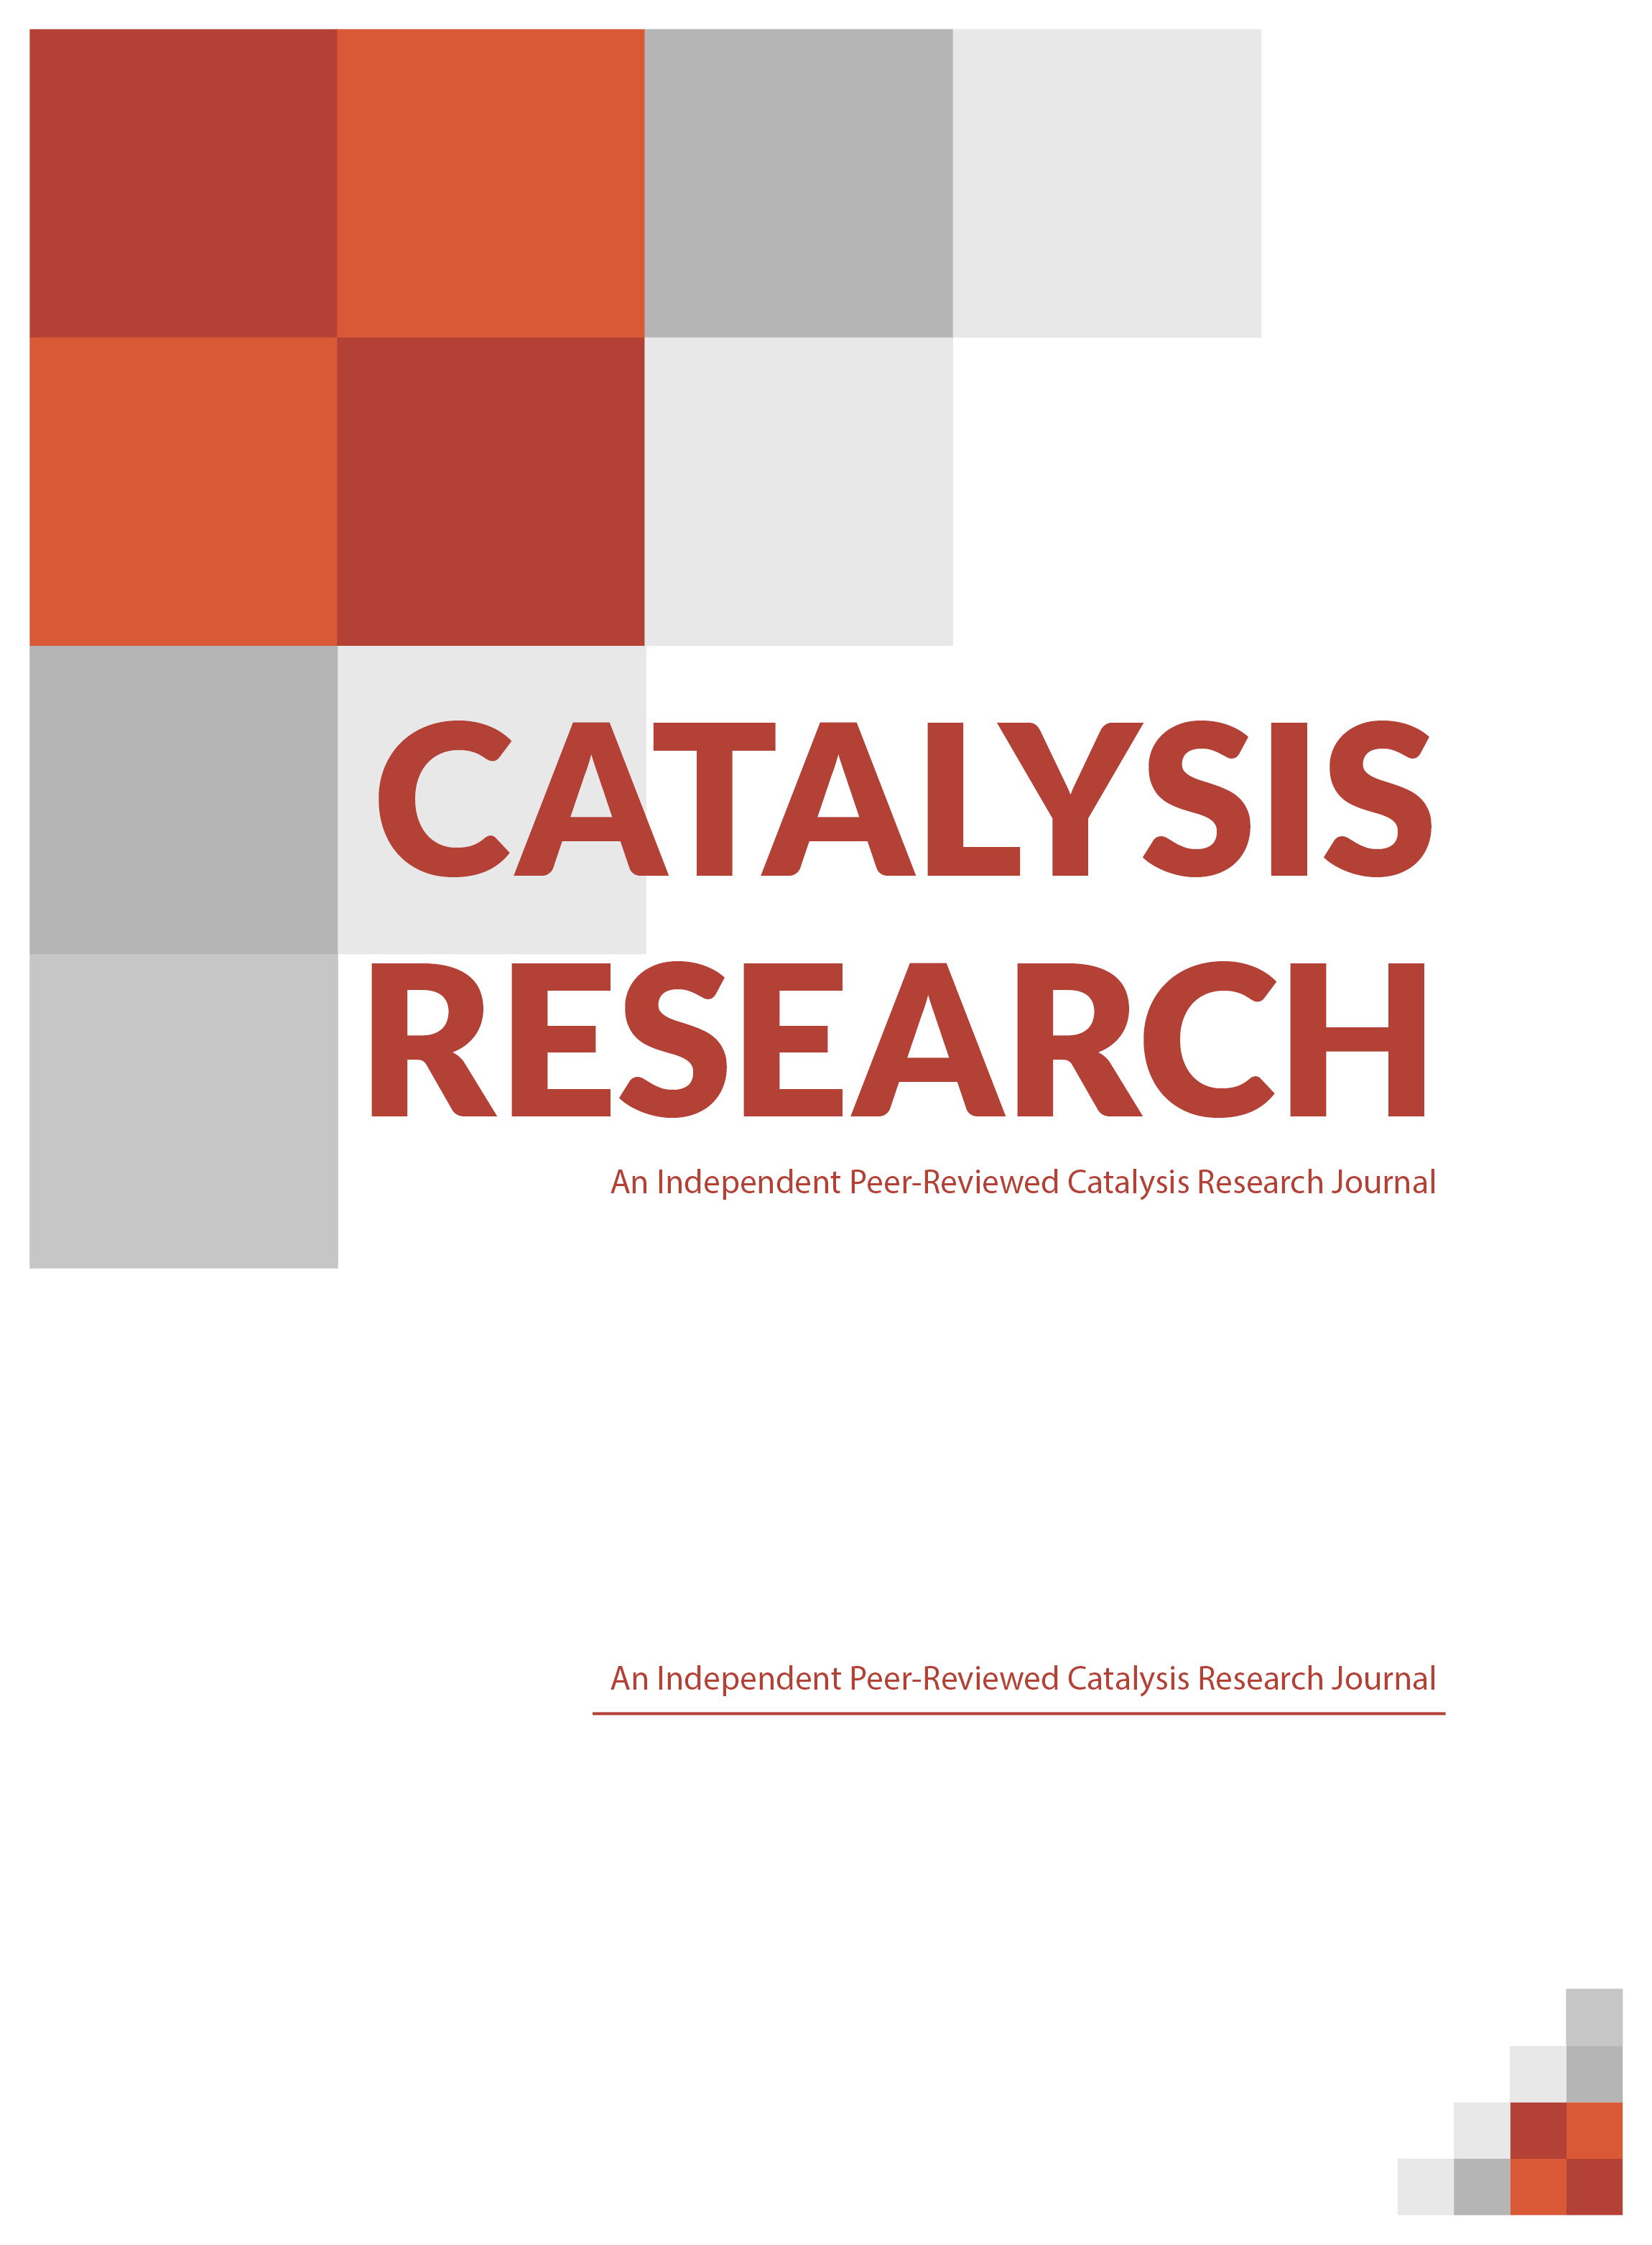 Catalysis Research